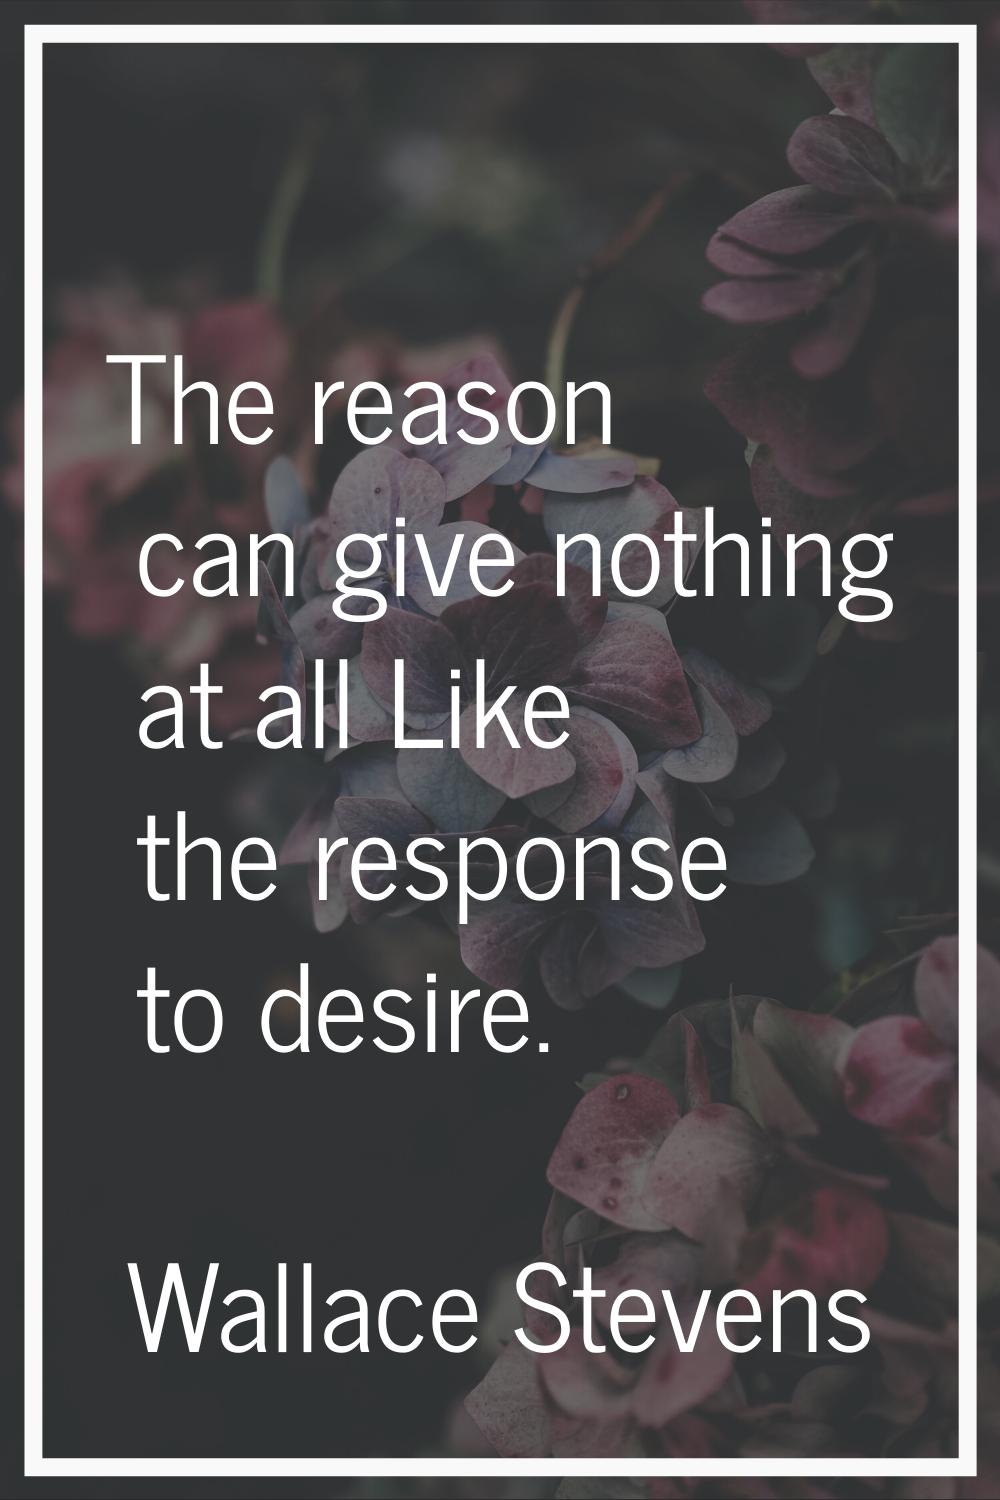 The reason can give nothing at all Like the response to desire.